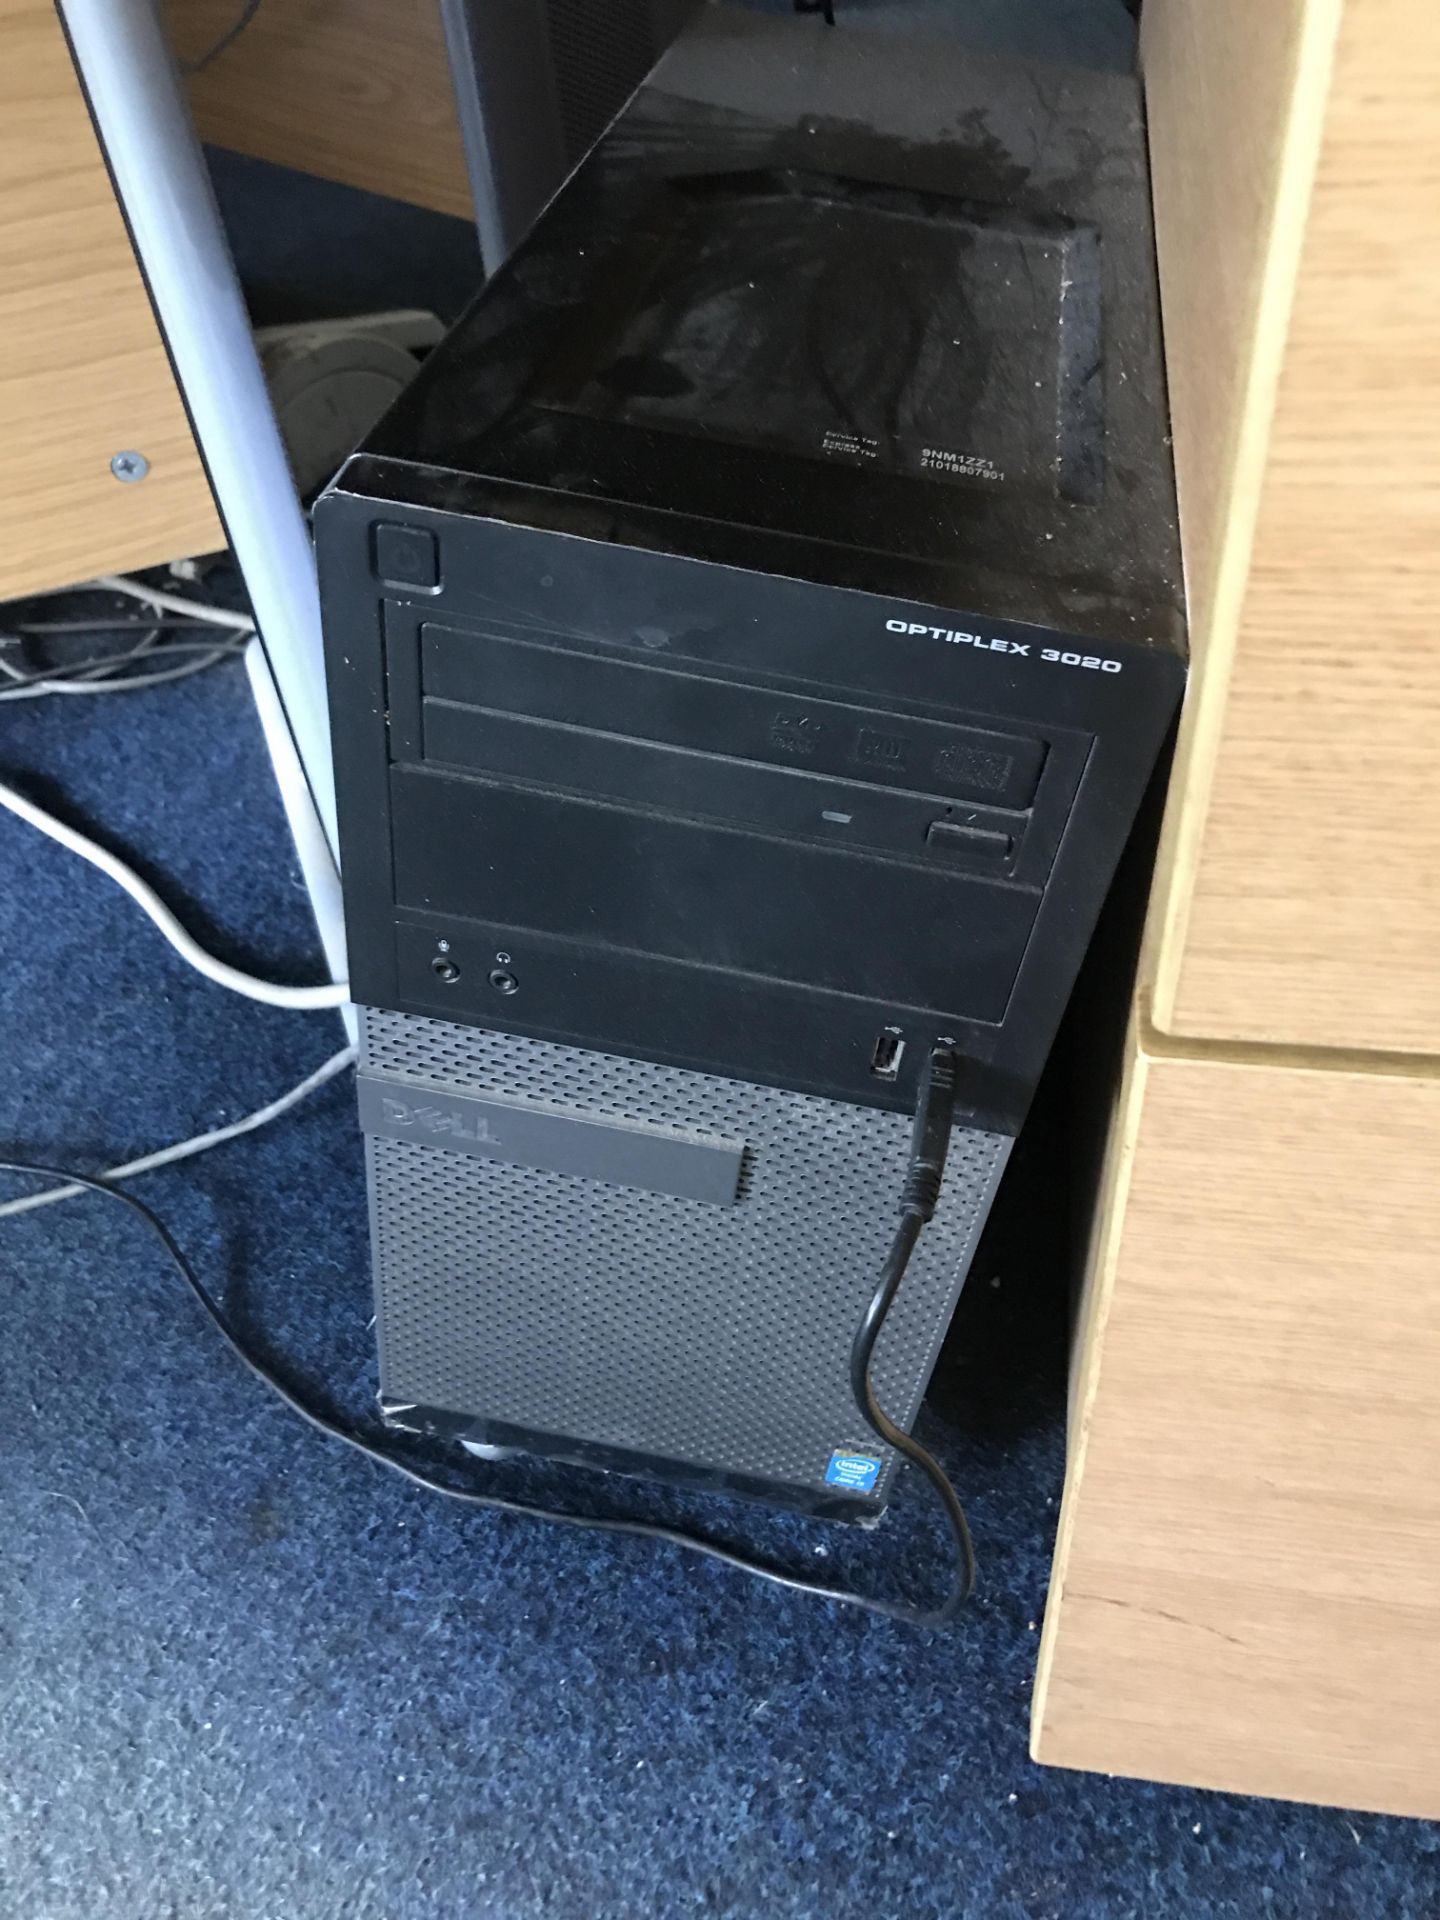 Dell Optiplex 3020 Intel Core i3 Personal Computer (hard disk removed), with two flat screen - Bild 2 aus 3